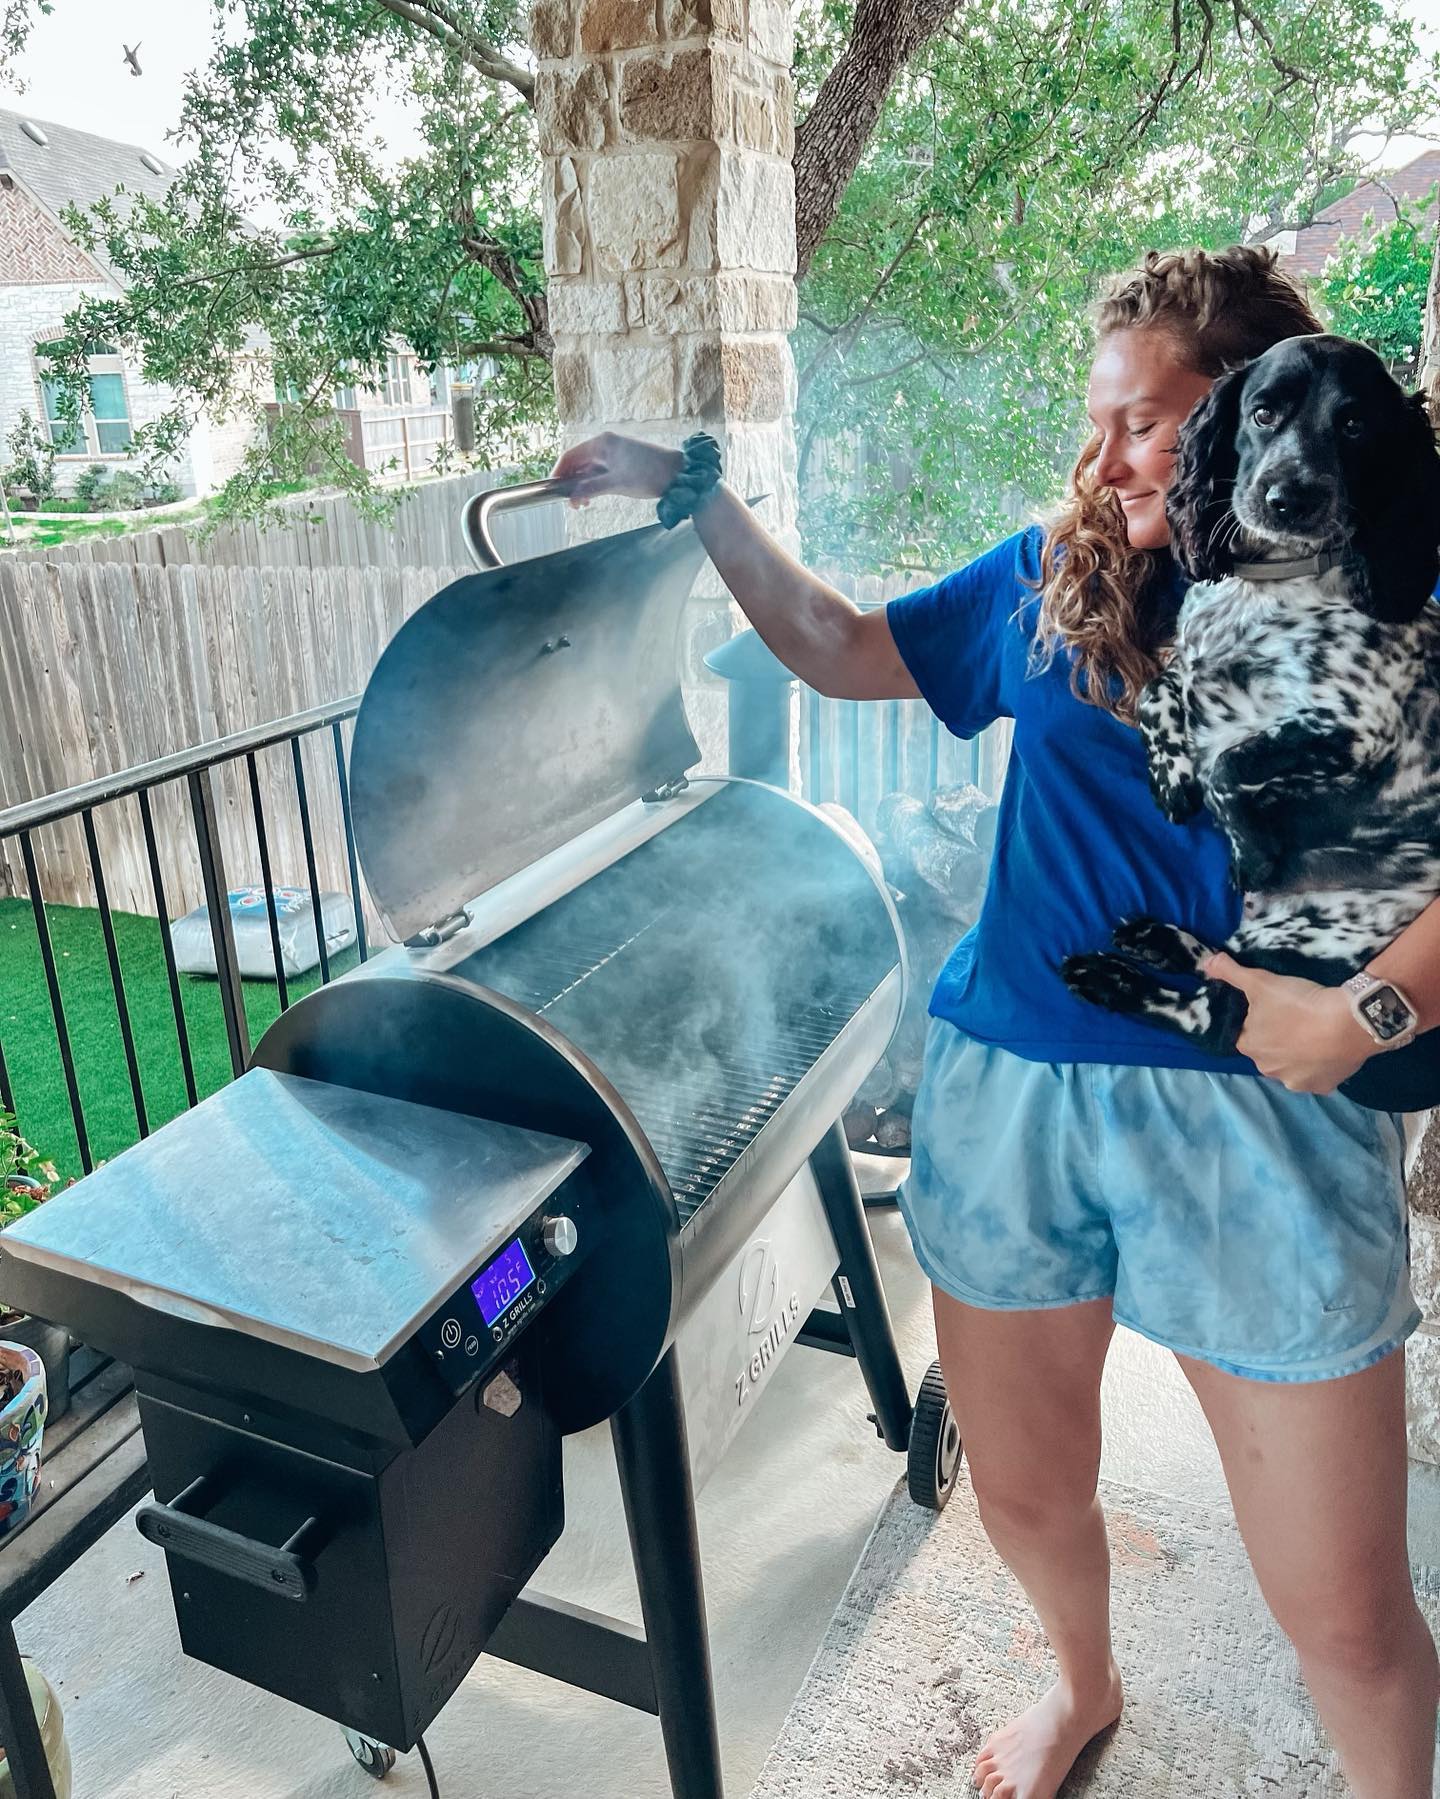 After some weekends of vacationing and working I finally had time to get back to it! What do you think I was getting my @zgrills ready for?? 
•
•
•
•
#backtoit #hardatwork #inthekitchen #cookingathome 
#wifeofahuntercooks #smoker #pelletgrill #pelletsmoker #smokergrill #smokedmeat #smokedbbq #smoked #wildgame #wildgamecooking #wildgameinnovations #fueledbynature #hunttoeat #eatwhatyoukill #publiclandowner #growth  #foodinfluencer #venisonrecipes